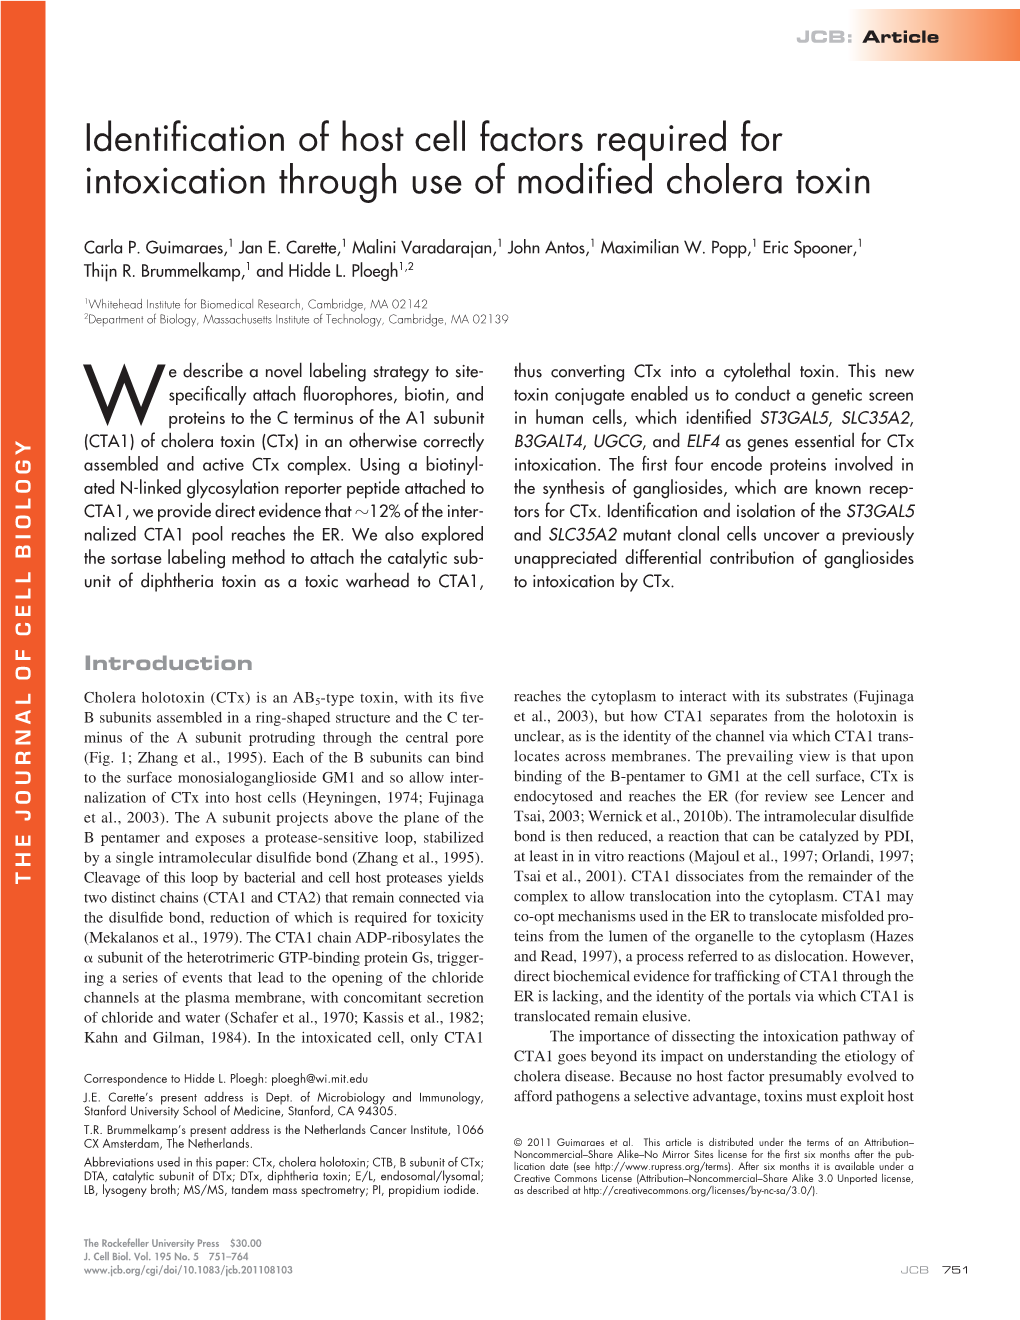 Identification of Host Cell Factors Required for Intoxication Through Use of Modified Cholera Toxin